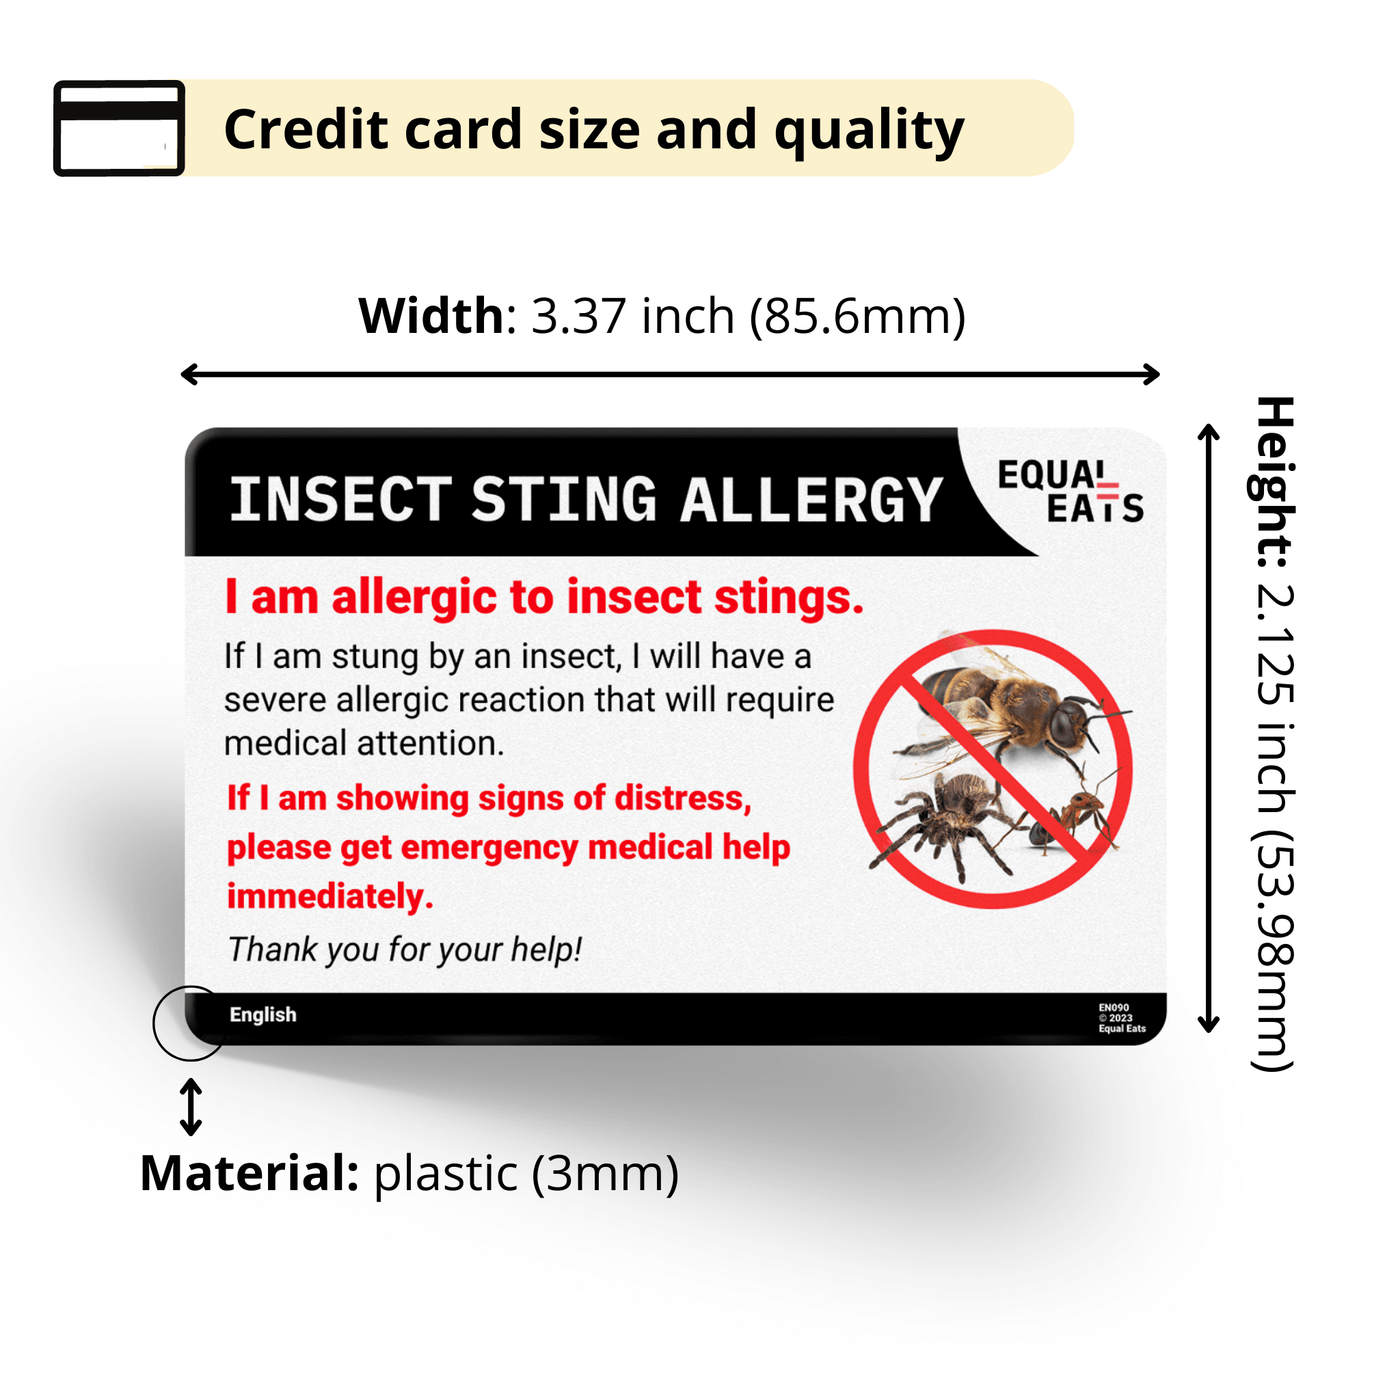 Swahili Insect Sting Allergy Card